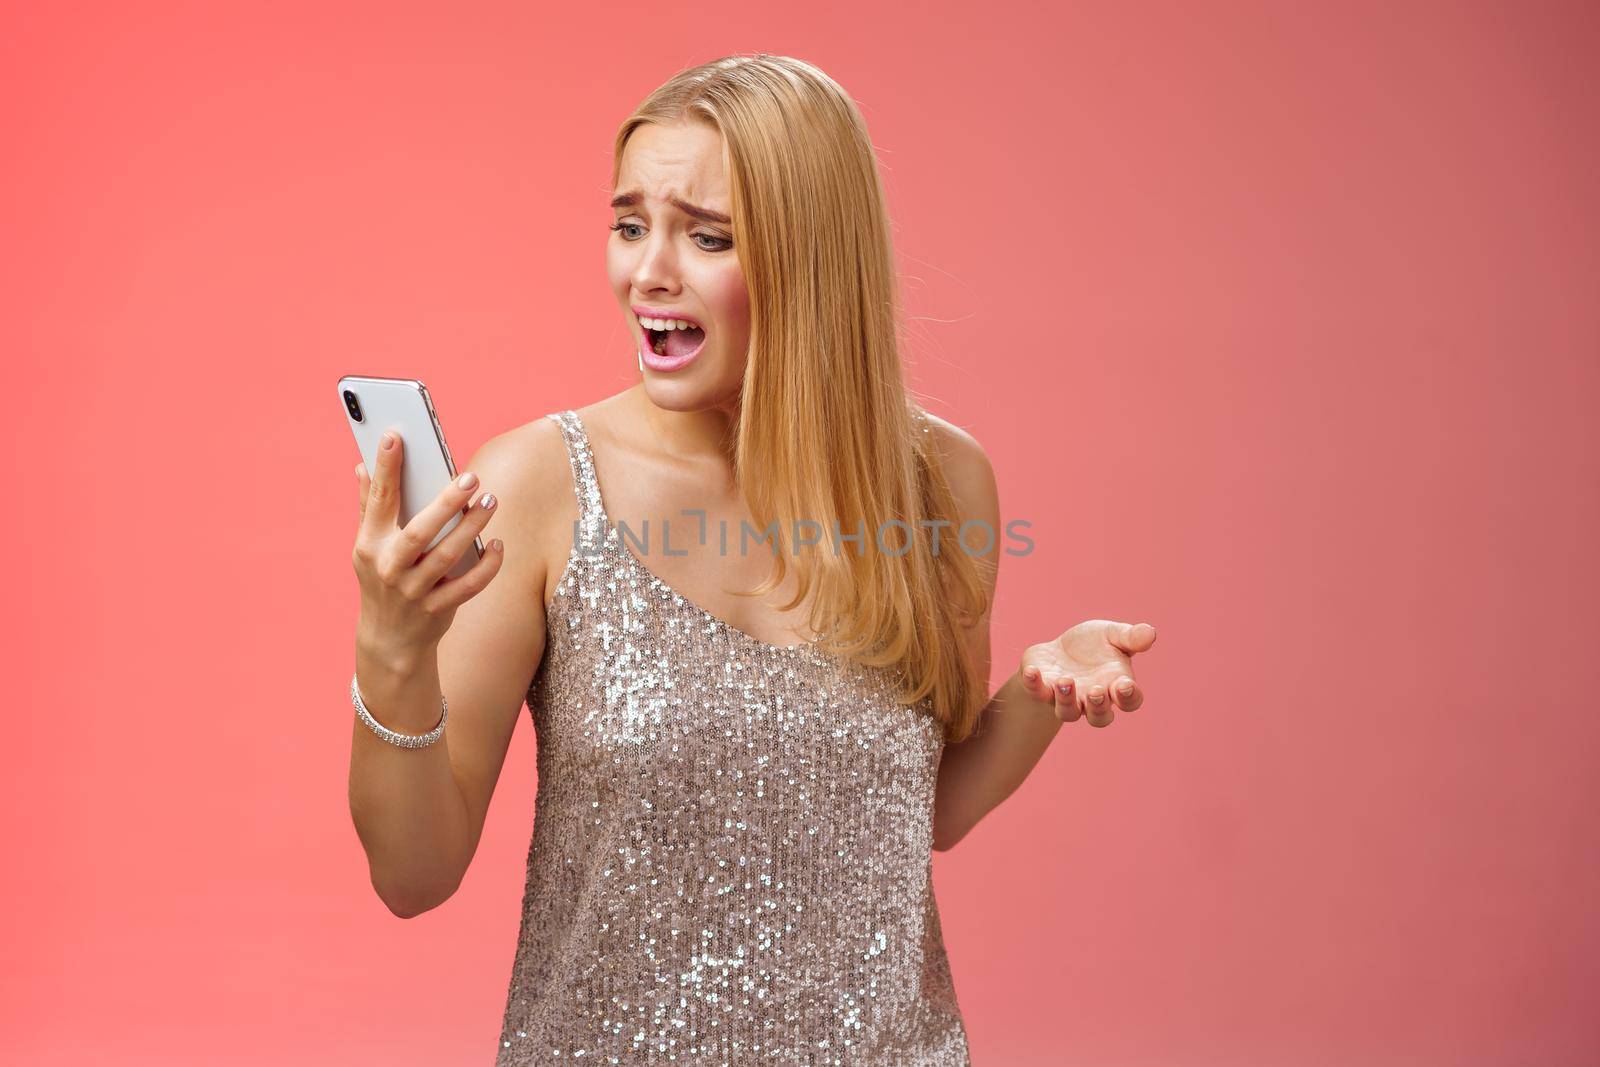 Troubled concerned arrogant young blond woman complaining yelling smartphone cannot call friend no signal holding smartphone look mobile display pissed moody arguging, red background.